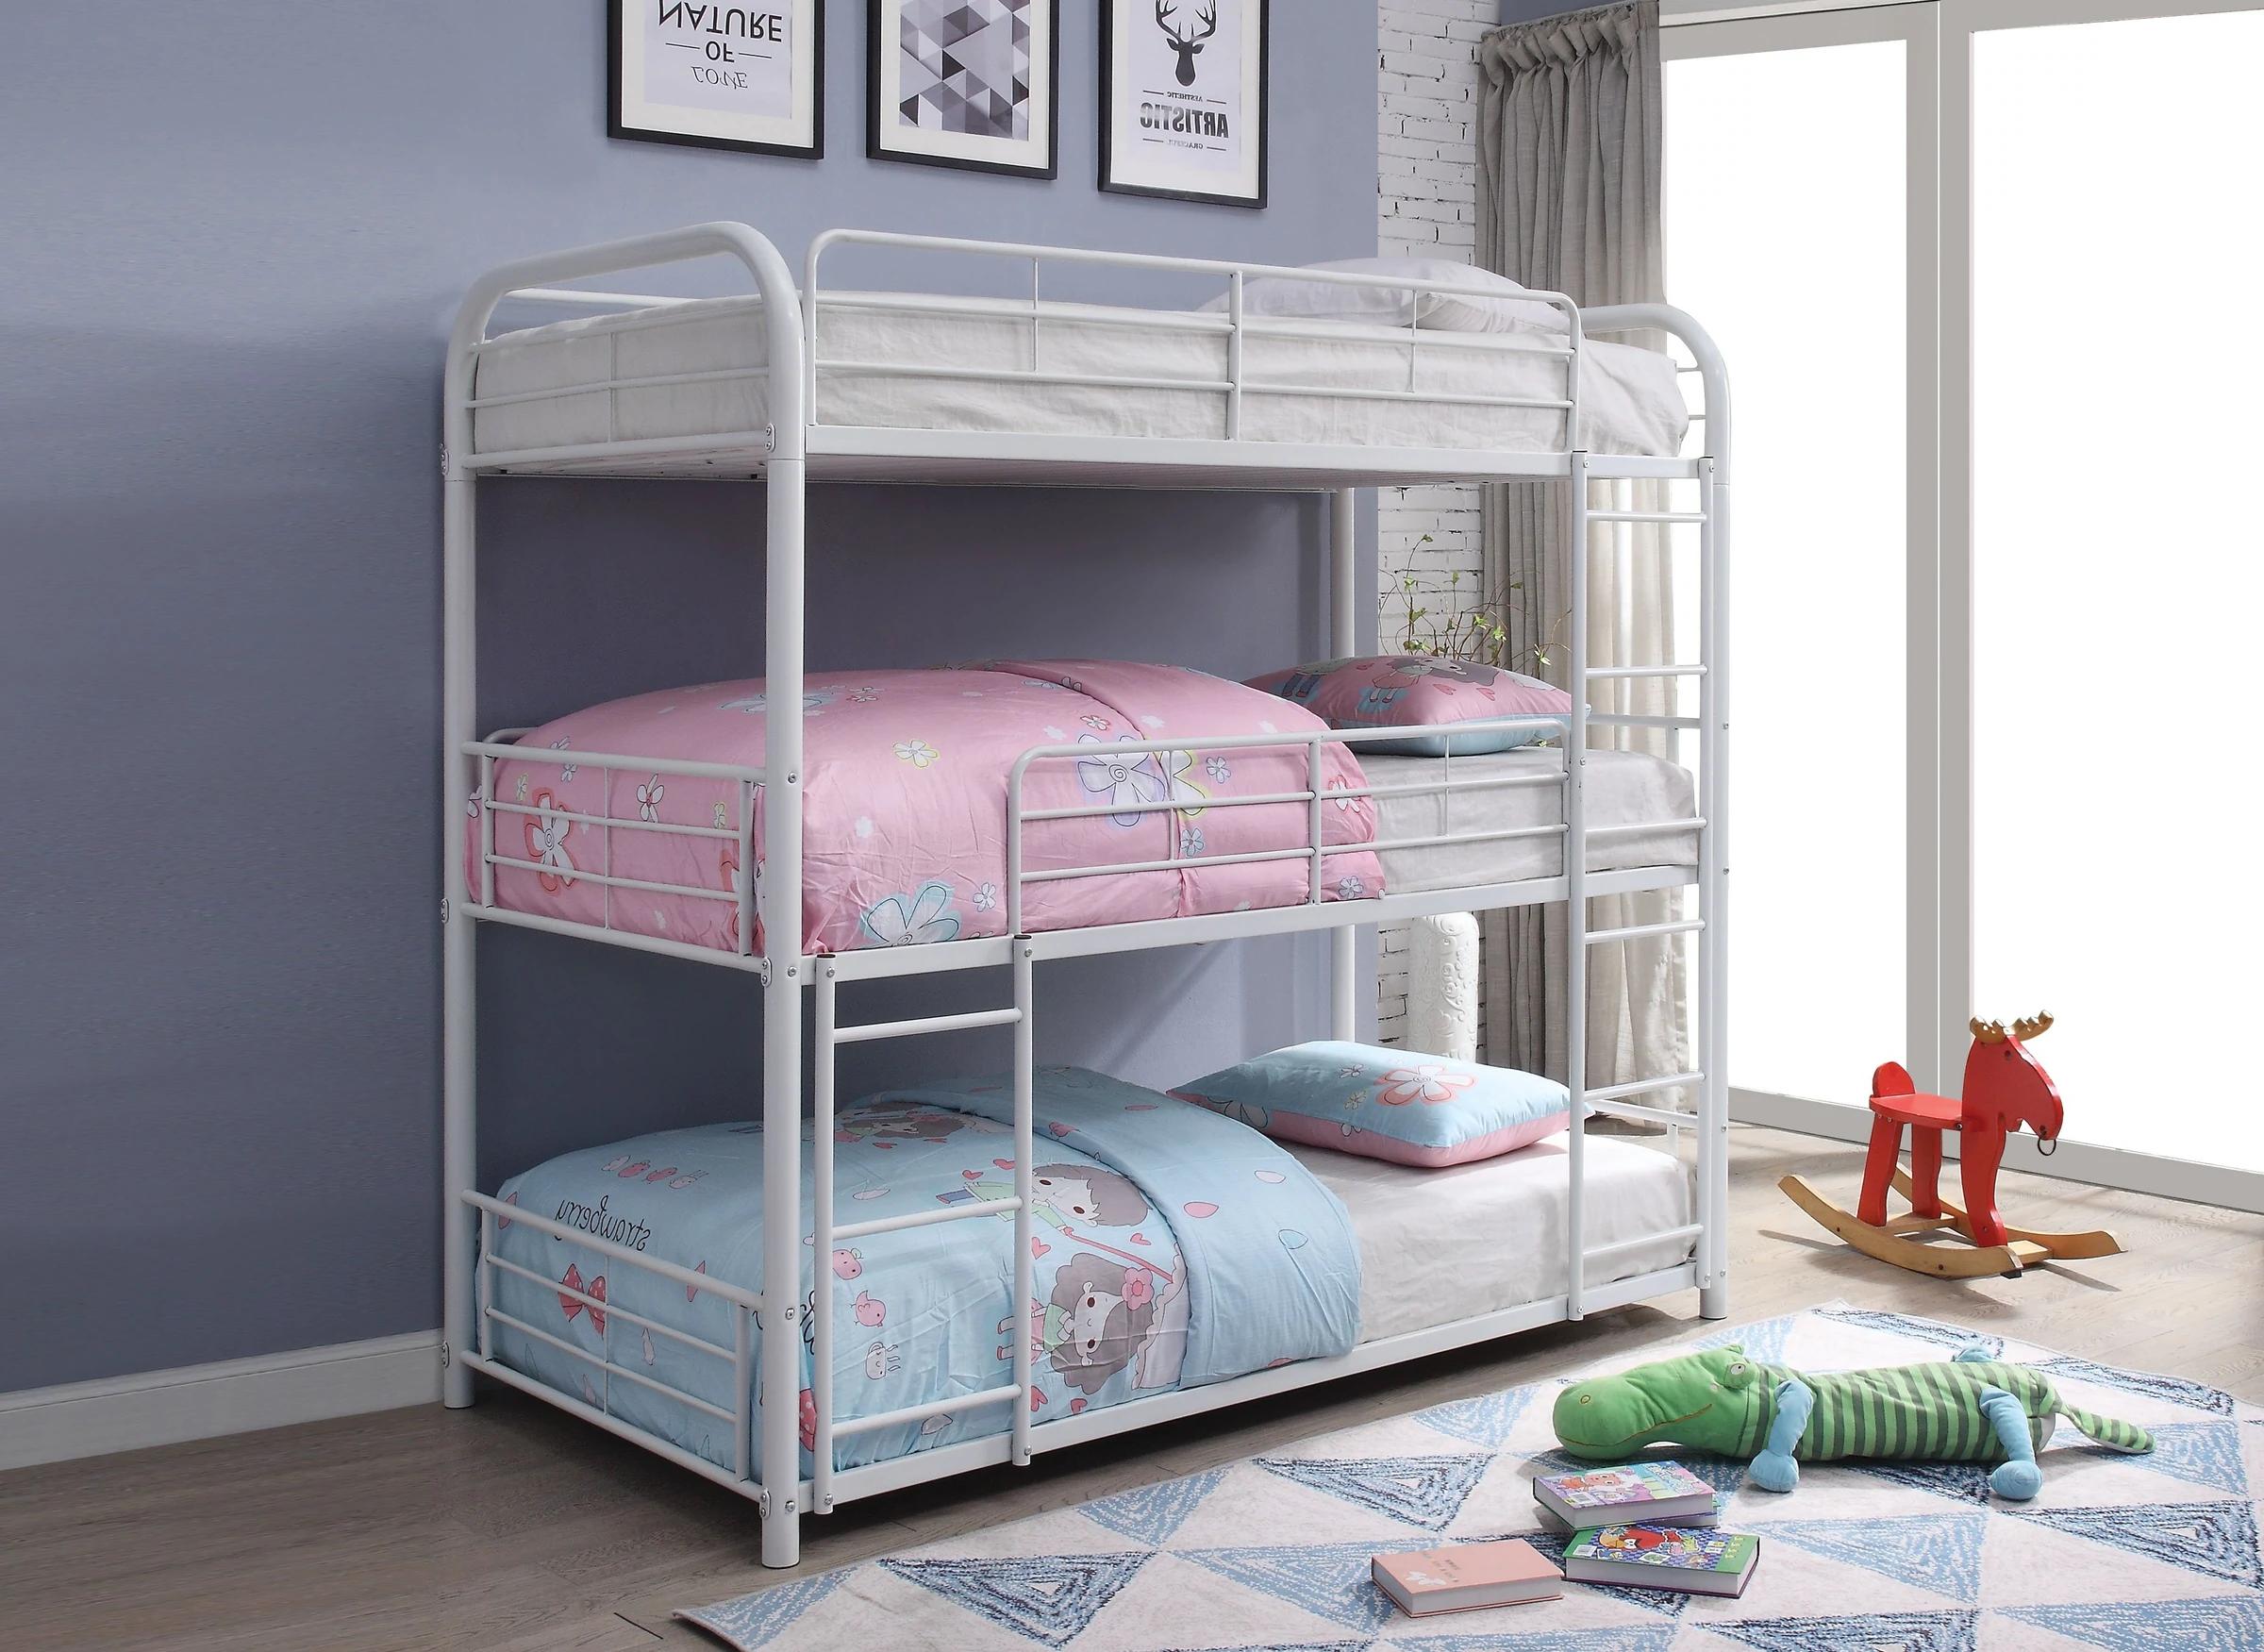 Simple T/t/t triple bunk bed Cairo 38110 in White 